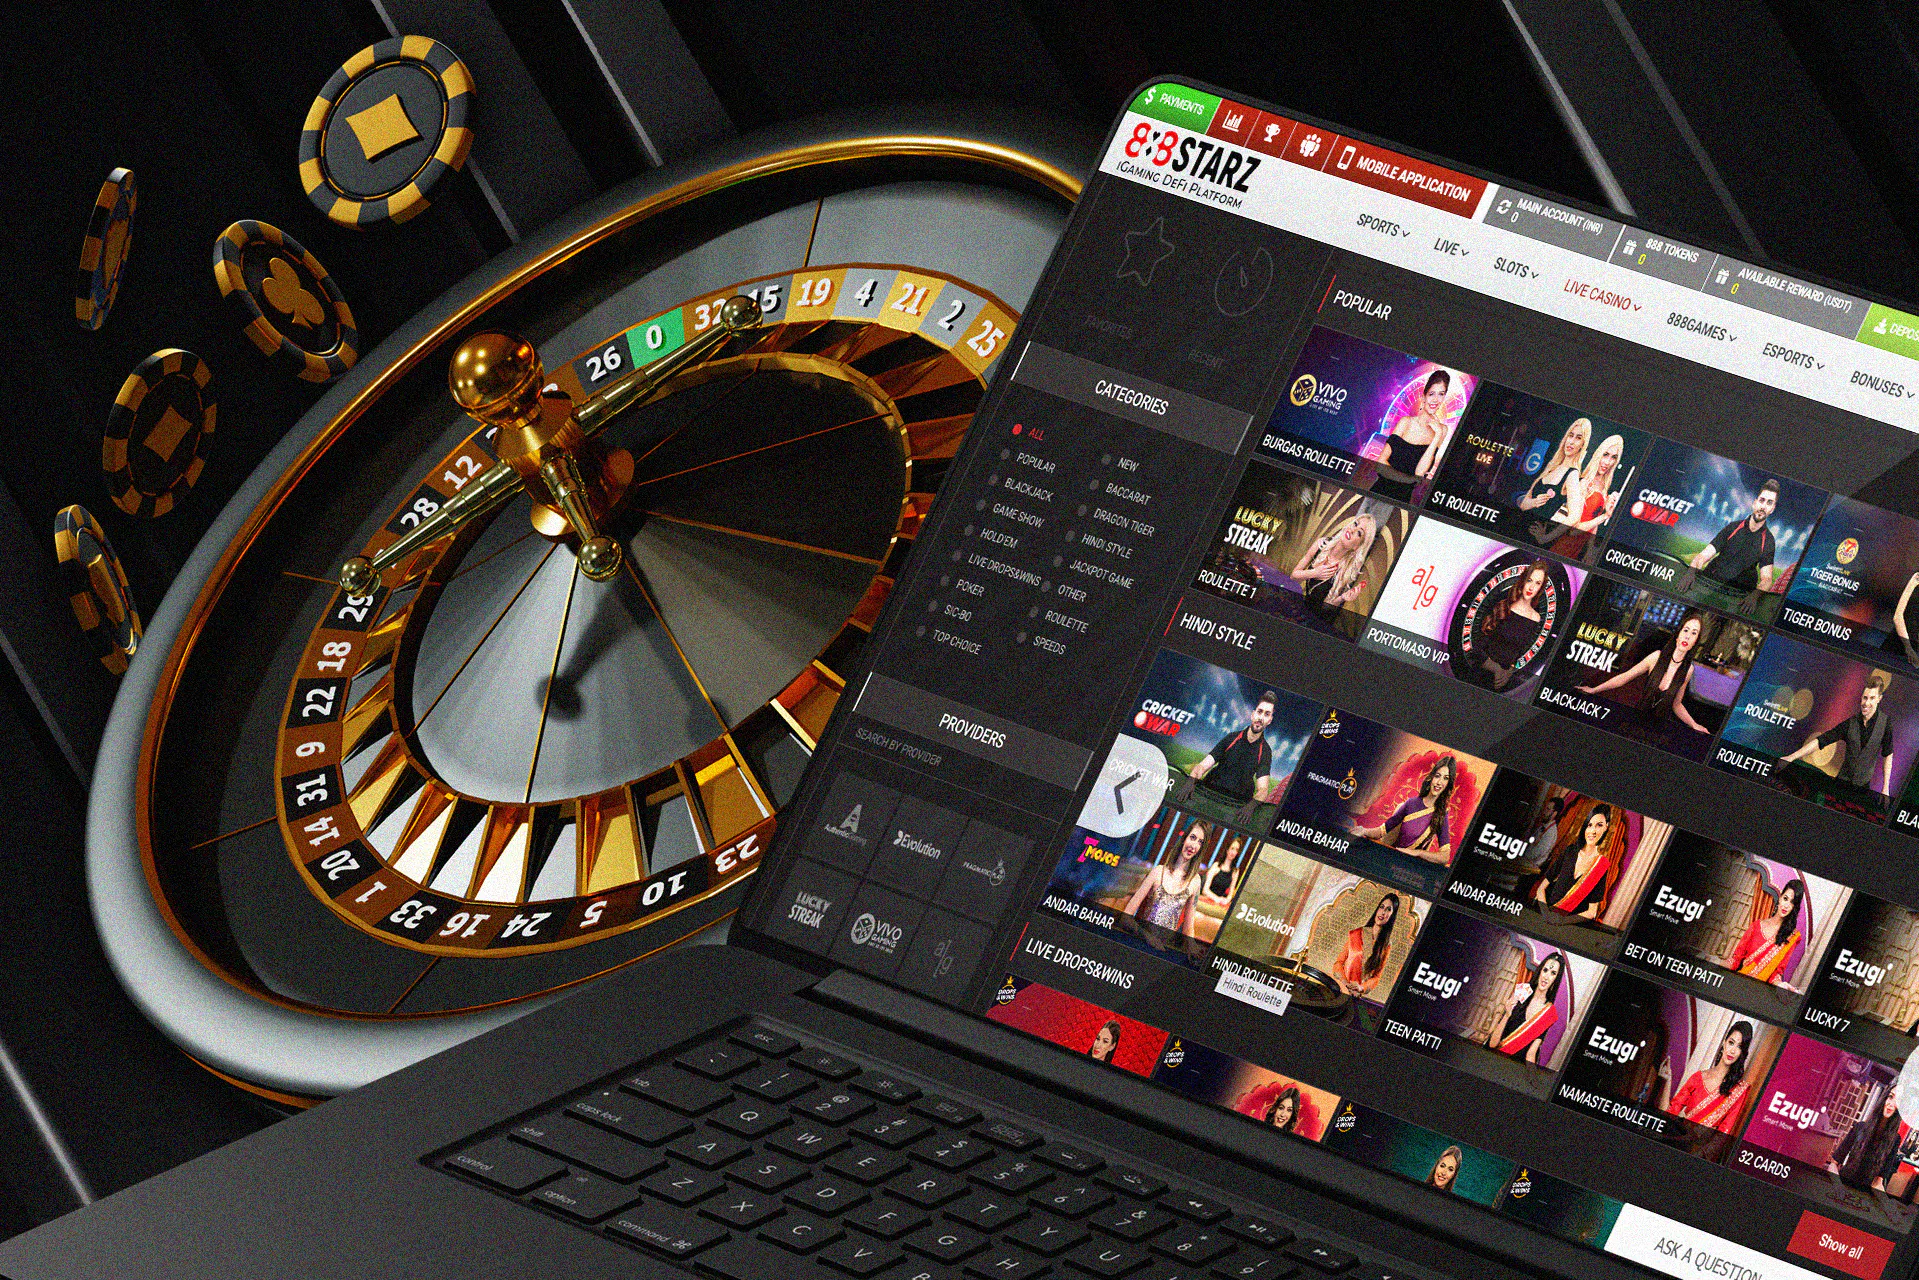 You can also play online casino games at 888starz.